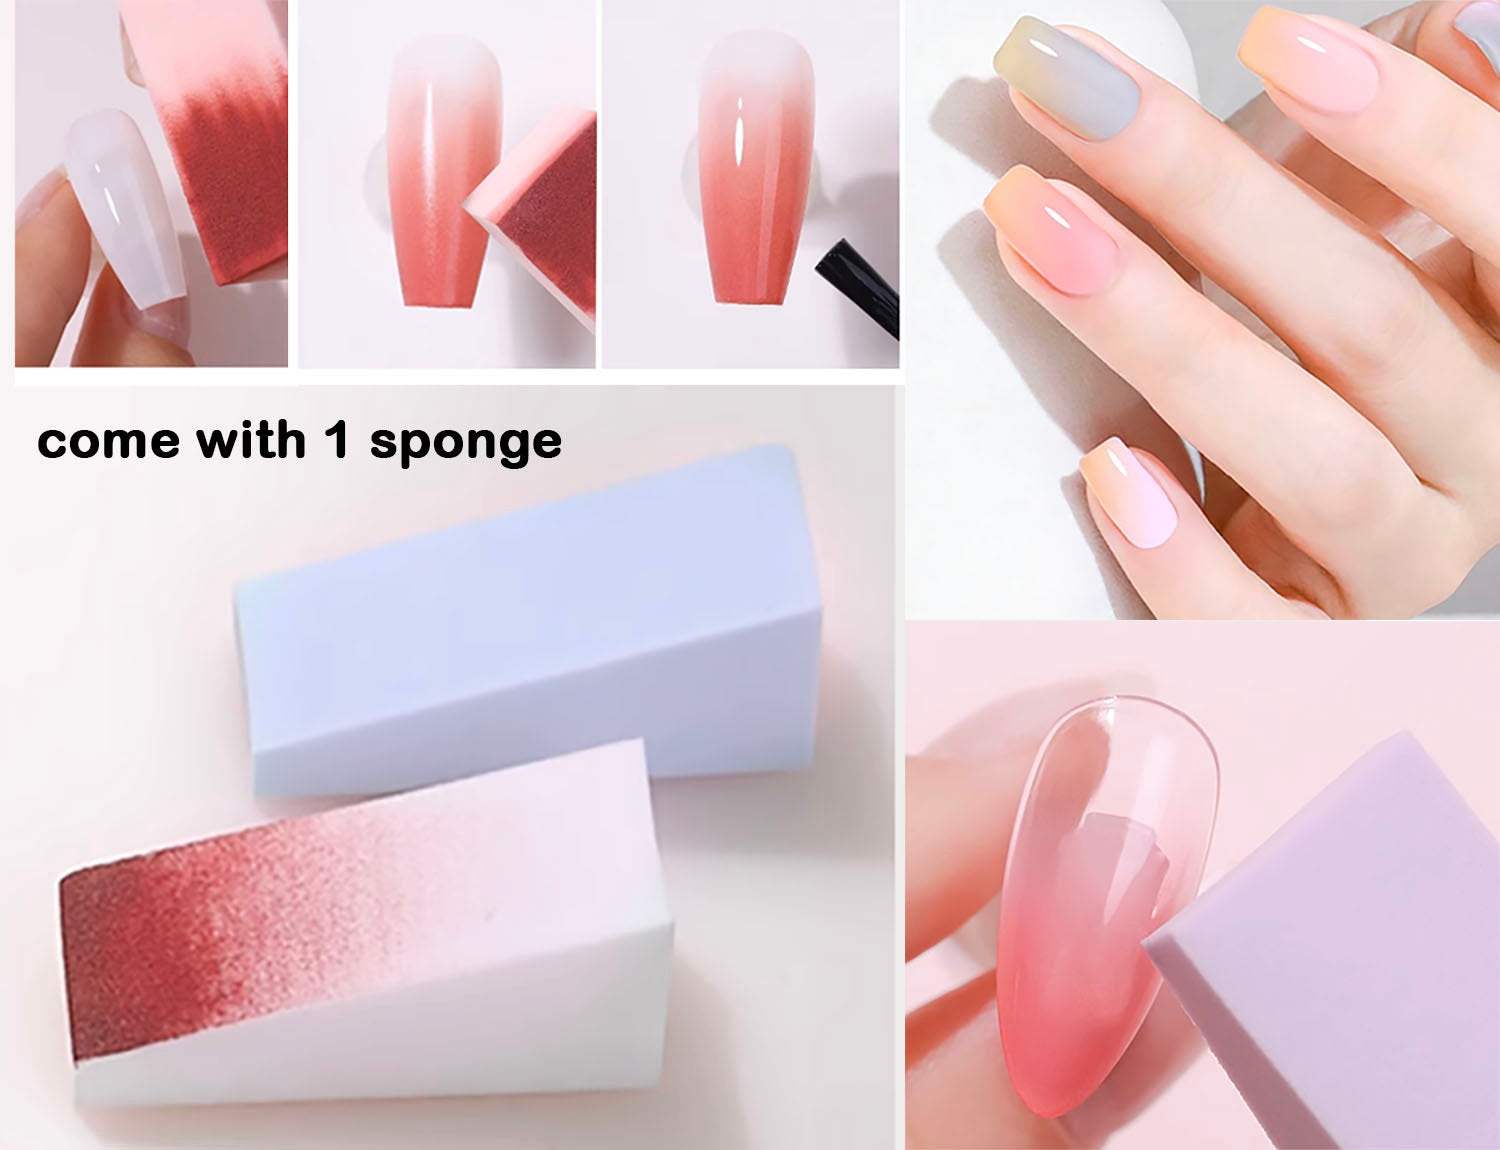 5ml Vivid Gradient Painting Nail Gel/ Dopamine Bright Ombre Strong Coverage Creamy Gels for Nails/ Paint paipai Gels Manicure